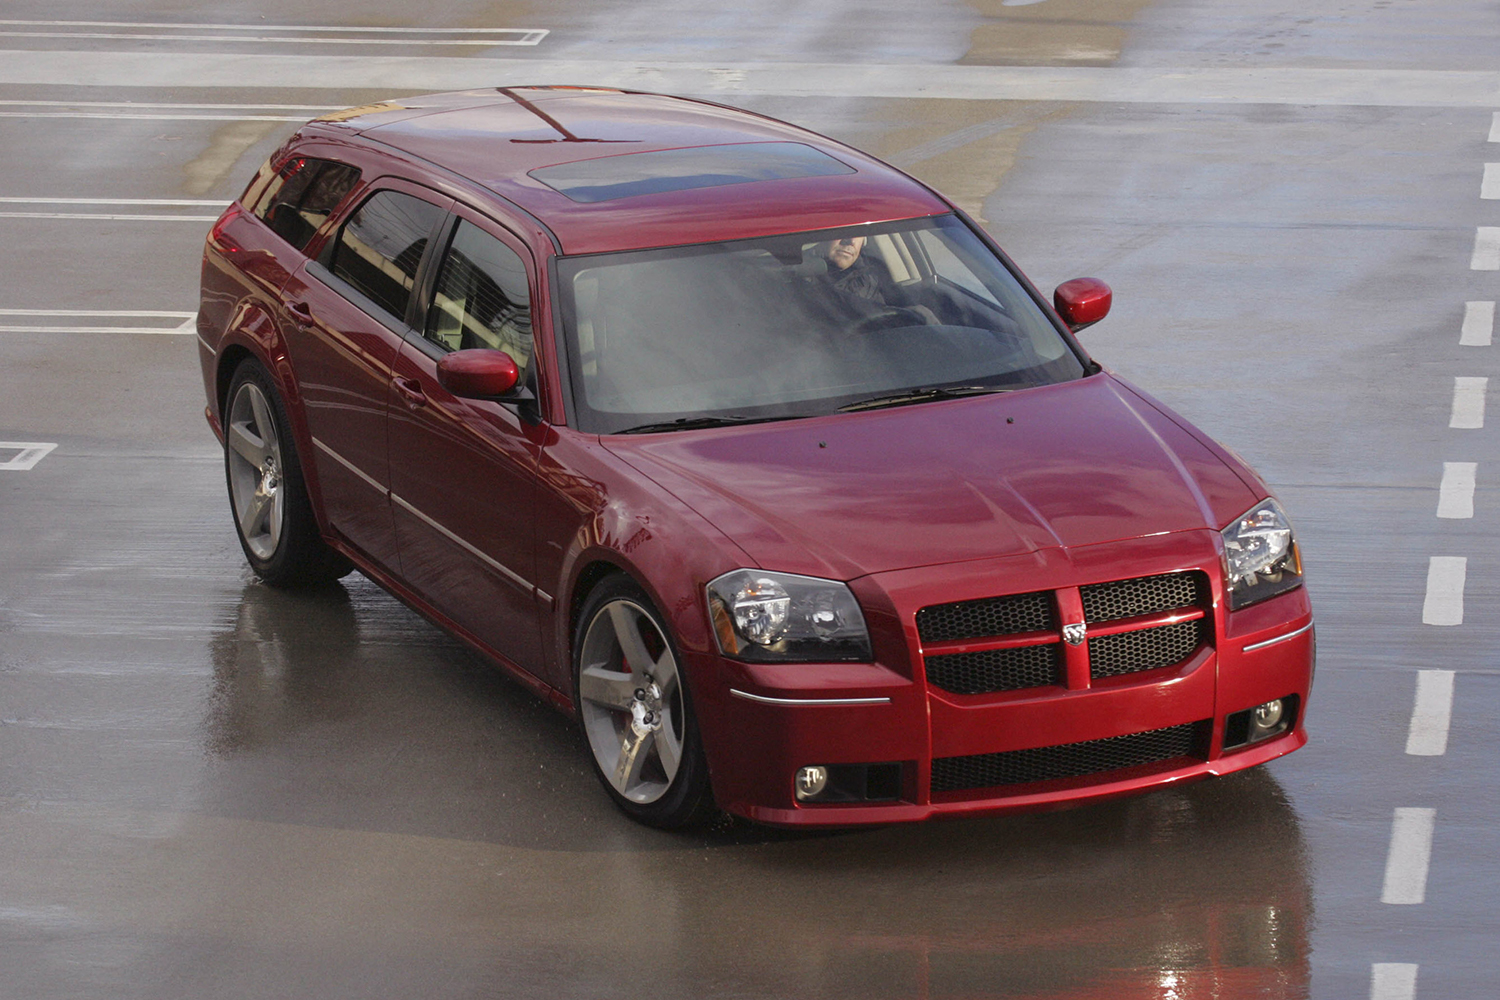 A red 2006 Dodge Magnum SRT8 wagon, which has potential to be a modern classic car